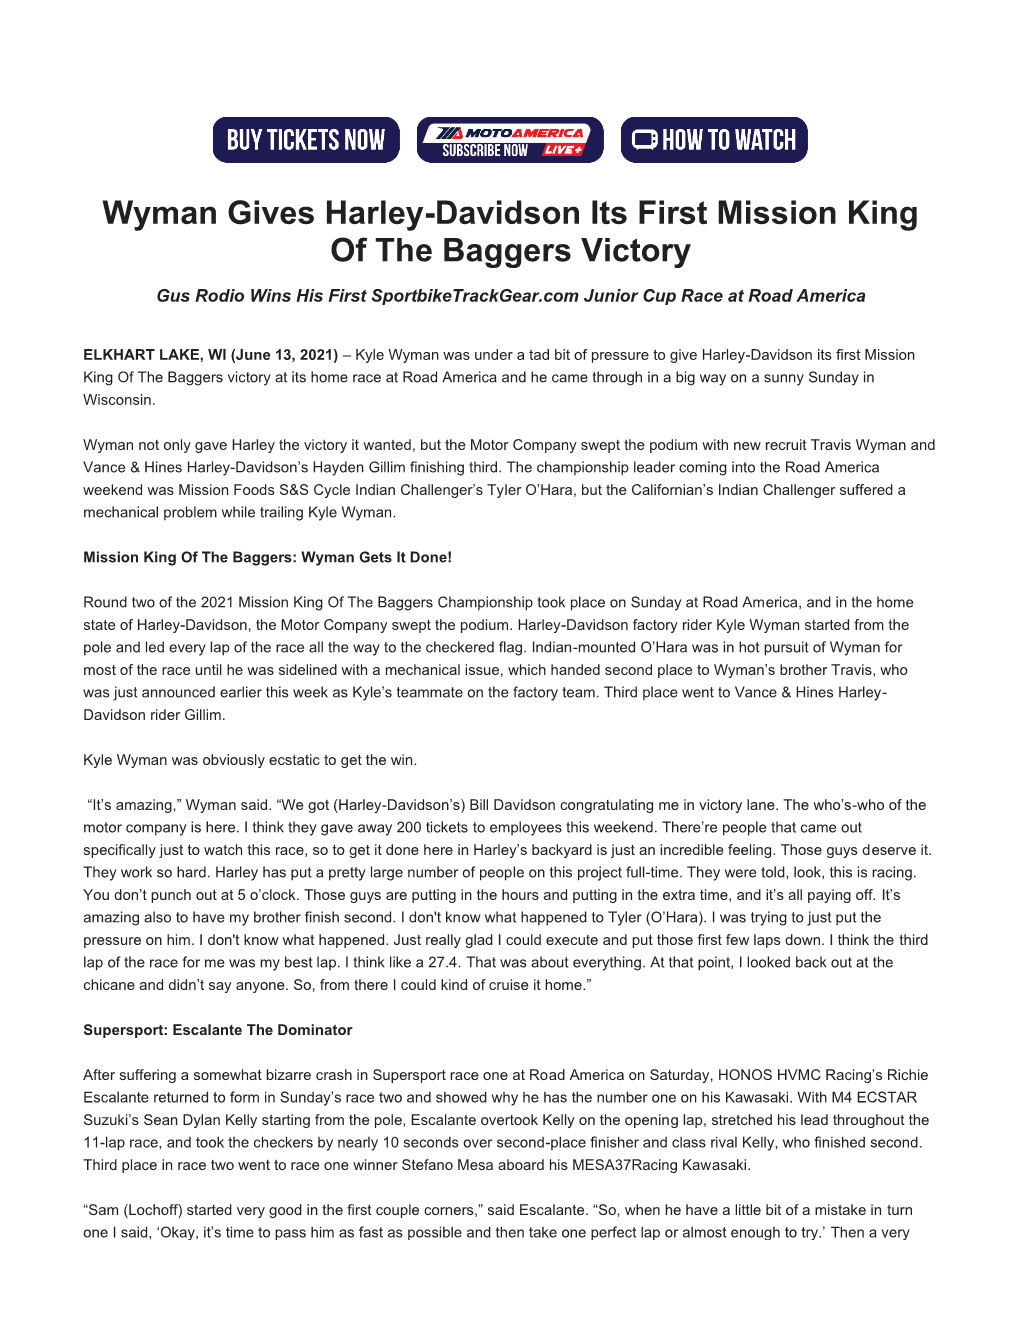 Wyman Gives Harley-Davidson Its First Mission King